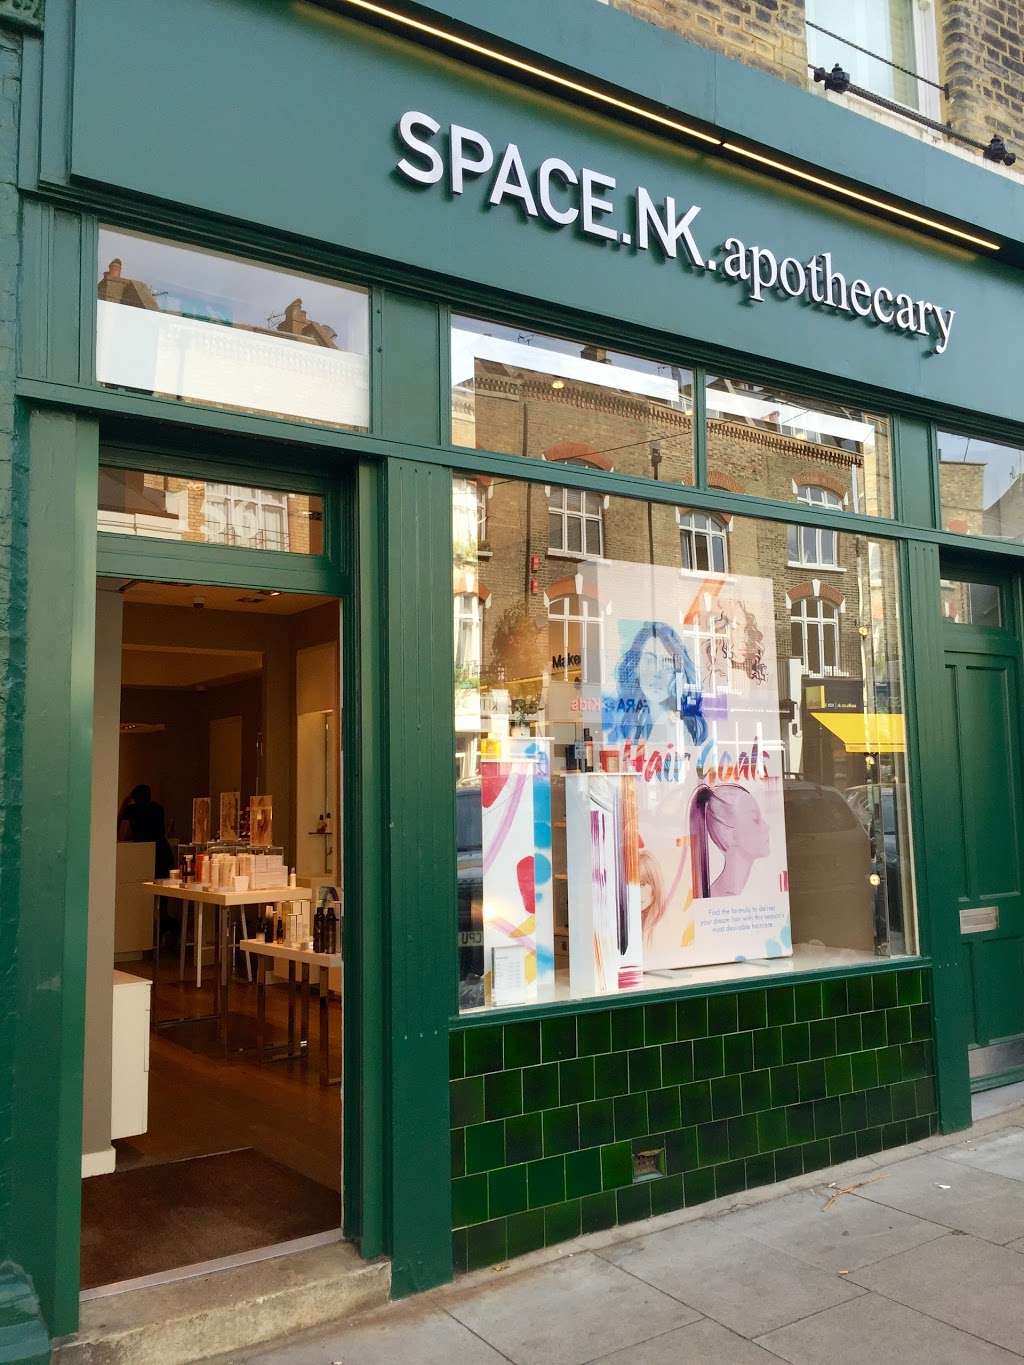 Space.NK.apothecary | 156 Regents Park Rd, Camden Town, London NW1 8XN, UK | Phone: 020 7586 9314